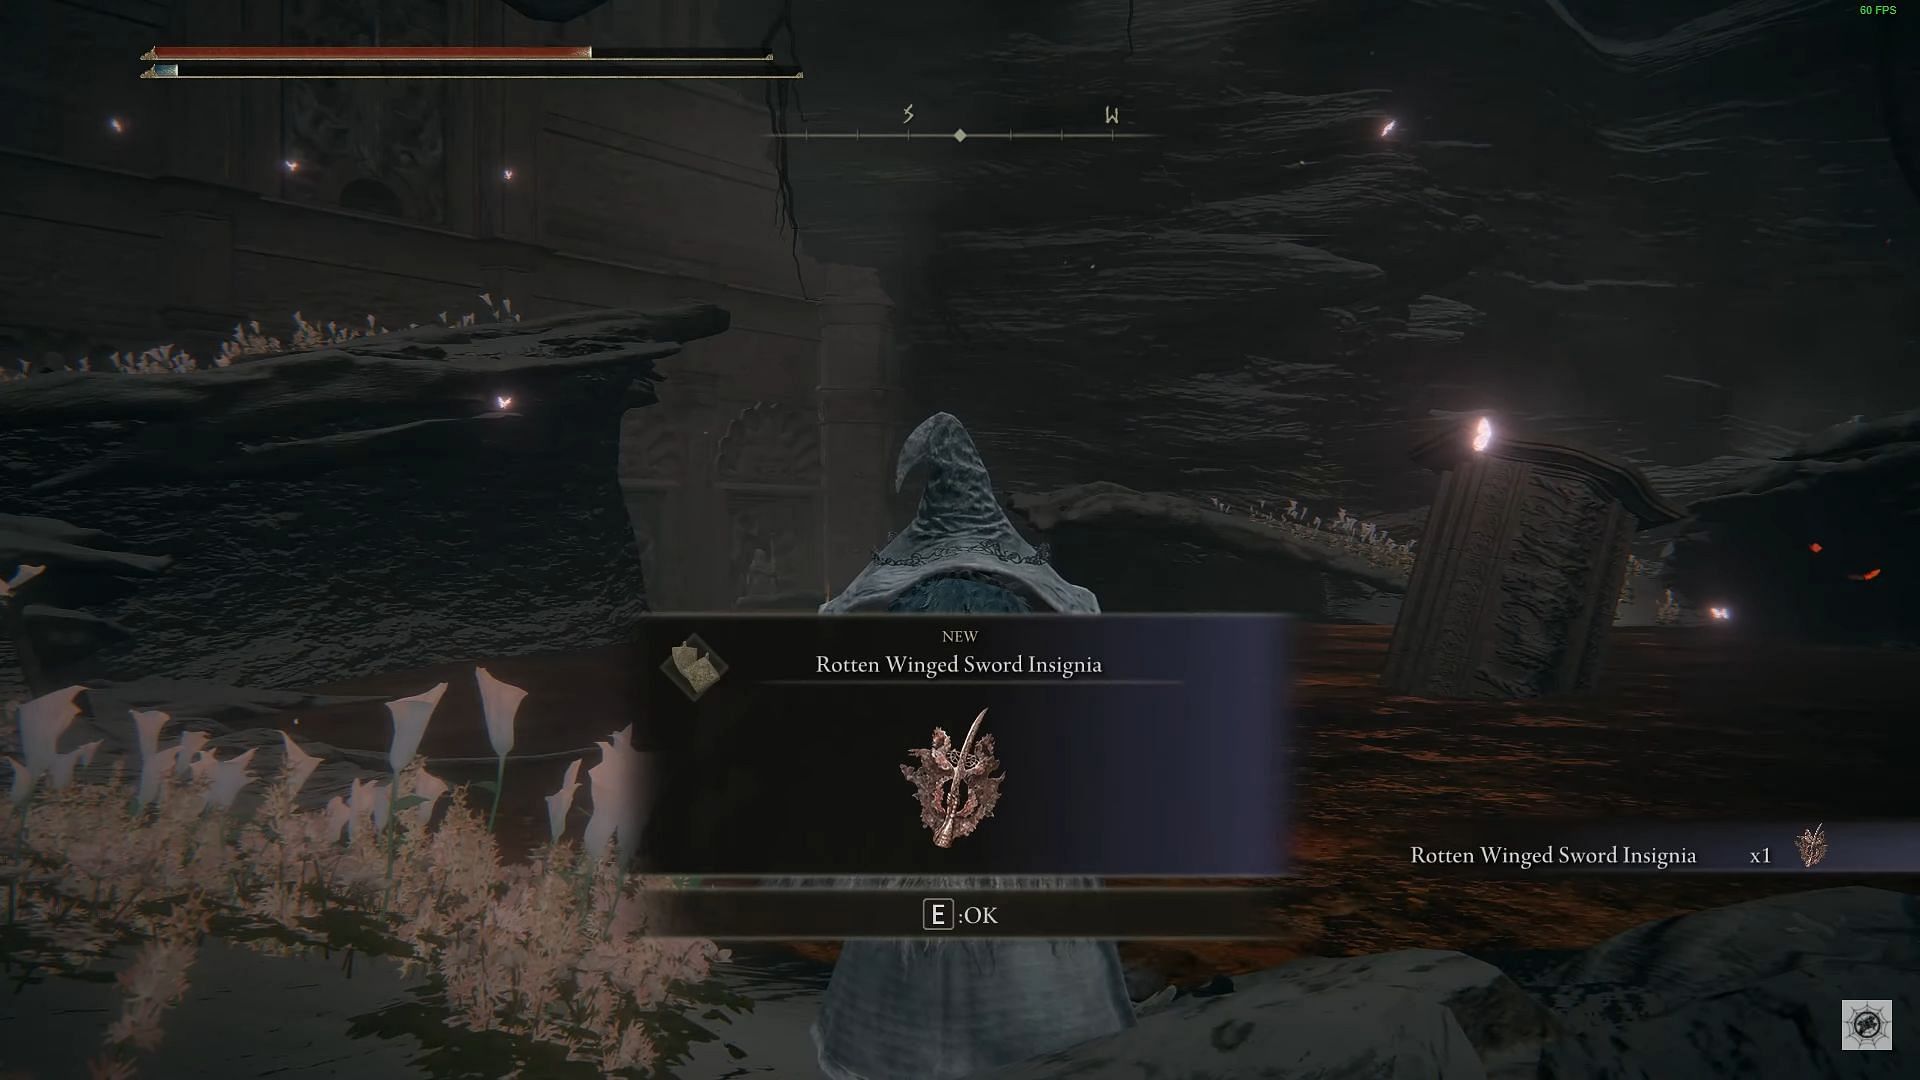 Rotten Winged Sword Insignia is a must-have for any melee builds in Elden Ring (Image via Sipder/YouTube)